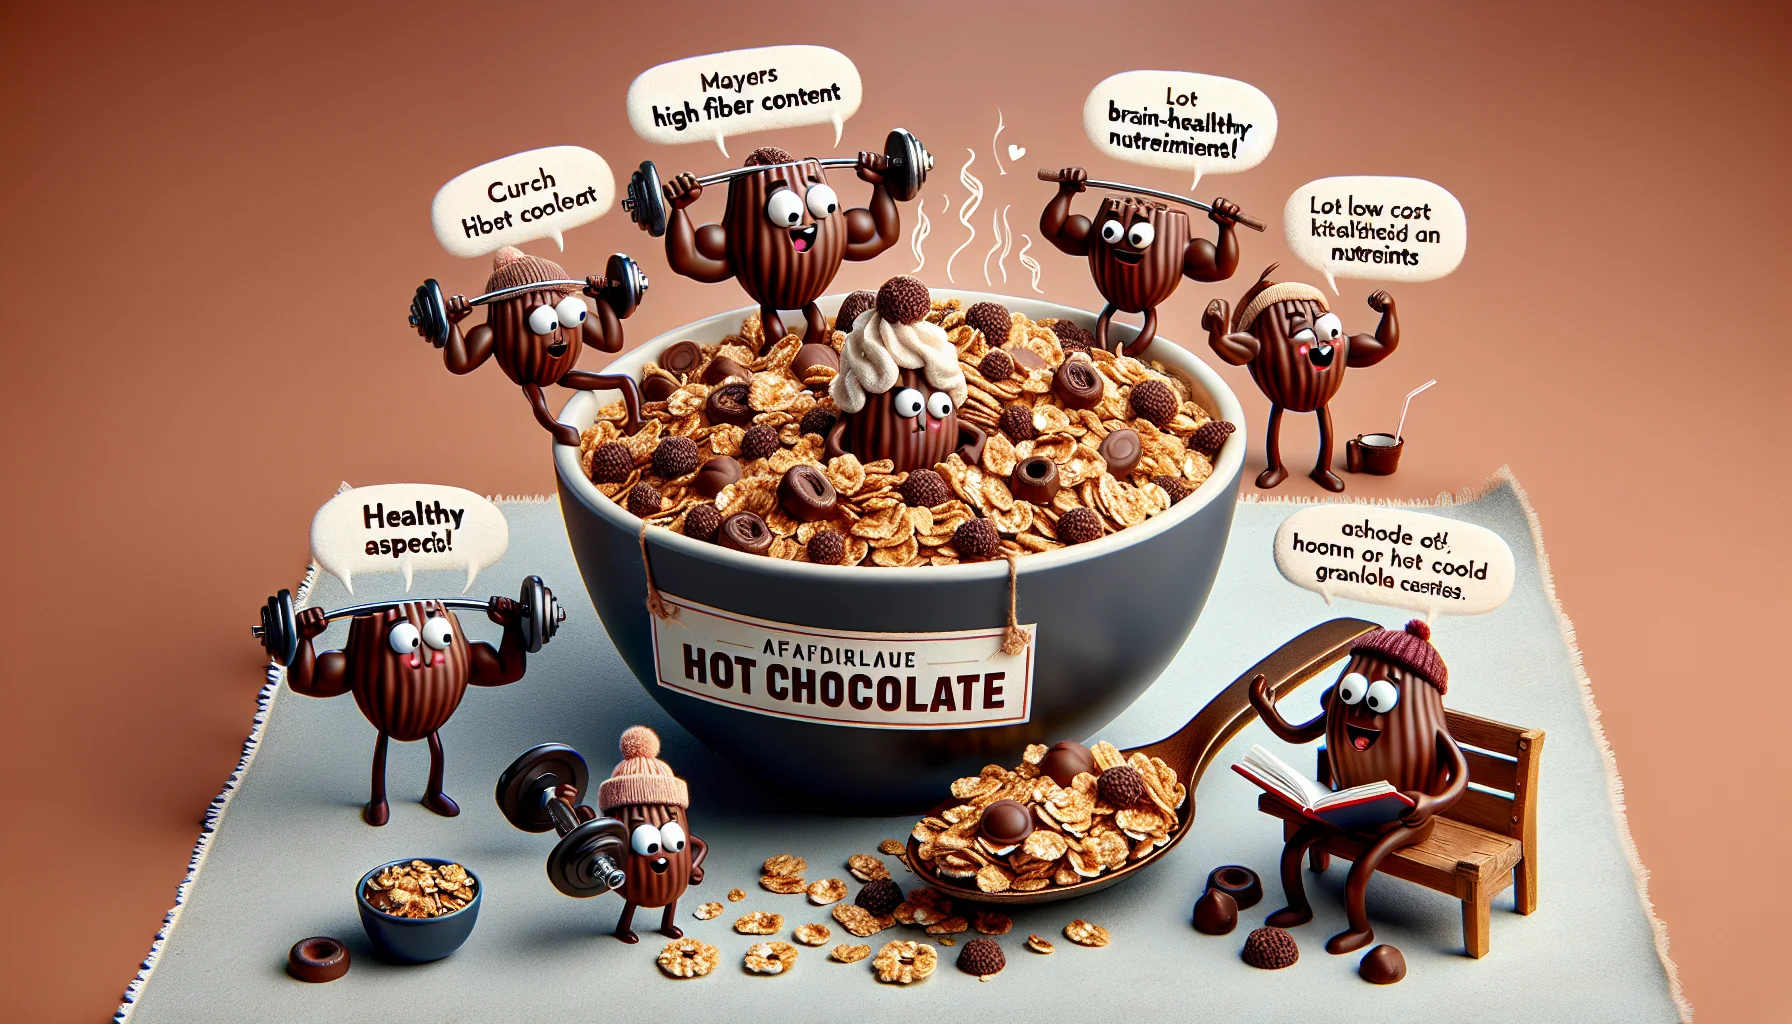 Craft a humorous yet realistic scene where hot chocolate flavored granola is stealing the limelight. Depict a big bowl of crunchy hot chocolate granola, with the granola pieces portrayed as cute, enticing characters illustrating its healthy aspects. Maybe a granola piece is lifting weights showing high fiber content, another is reading a book symbolizing brain-healthy nutrients etc. To underline the affordability aspect, these characters could be hanging out in a fancy setting typically related to expensive foods but jokingly remarking on the low cost of granola. Completing the picture, let there be humans of different ages, genders, and descents laughing and enjoying the spectacle, tempted to choose granola as their go-to option.